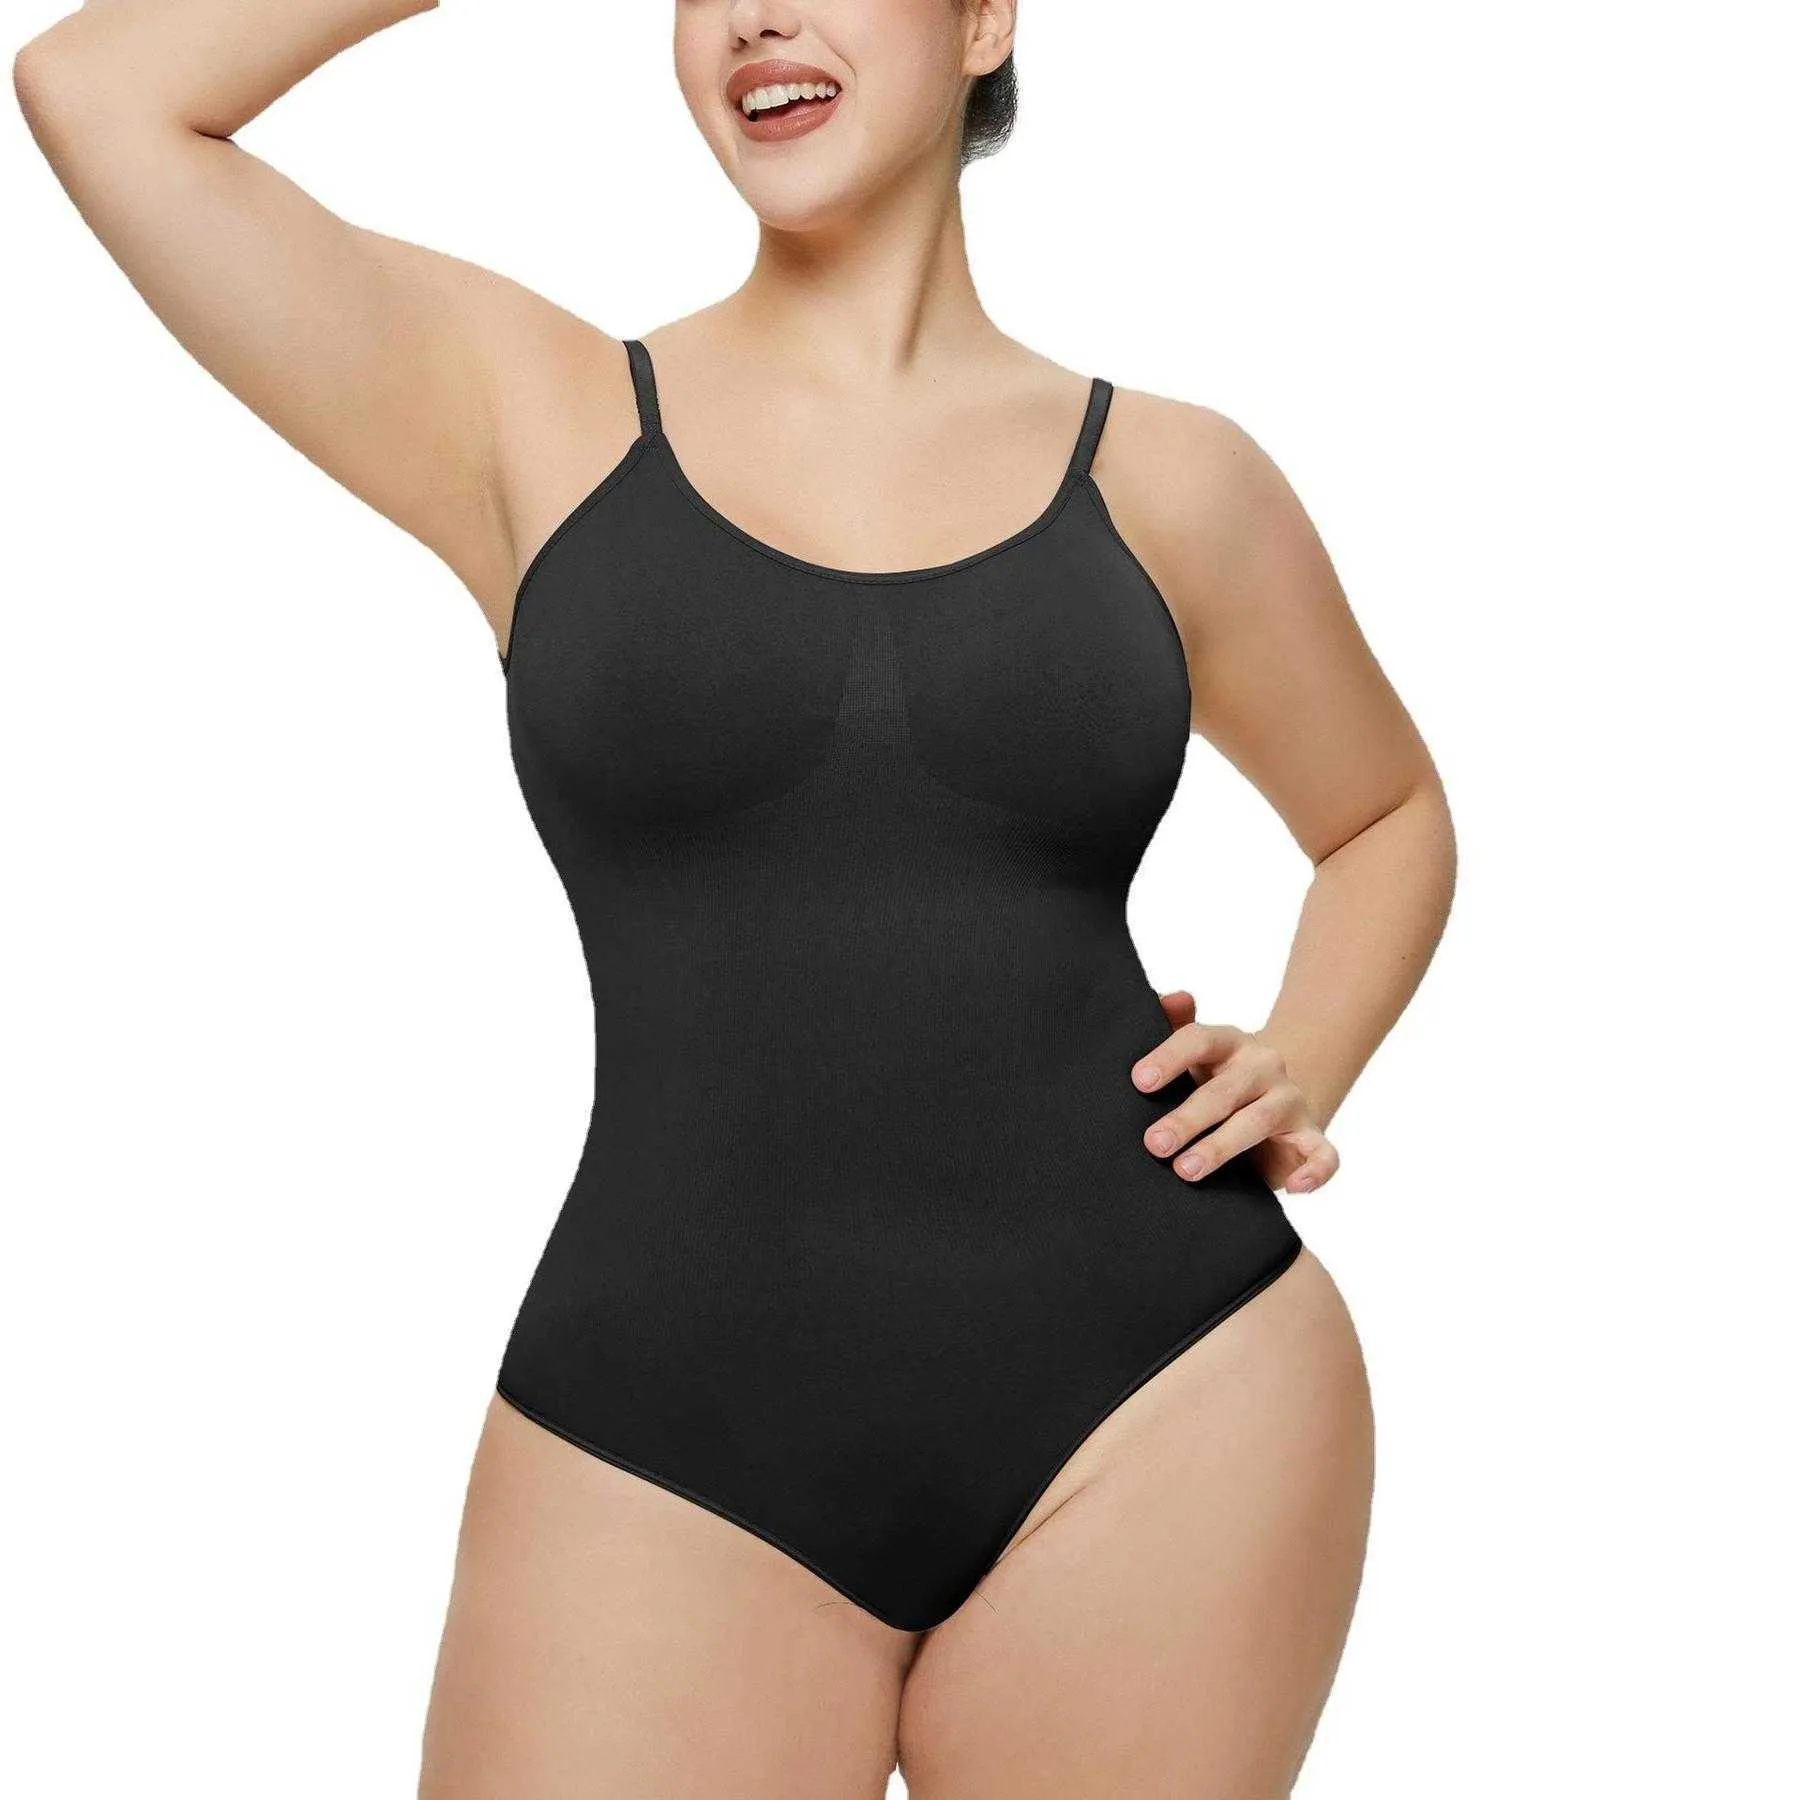 Seamless One Piece Corset Leotard Swimsuit For Women Large Size